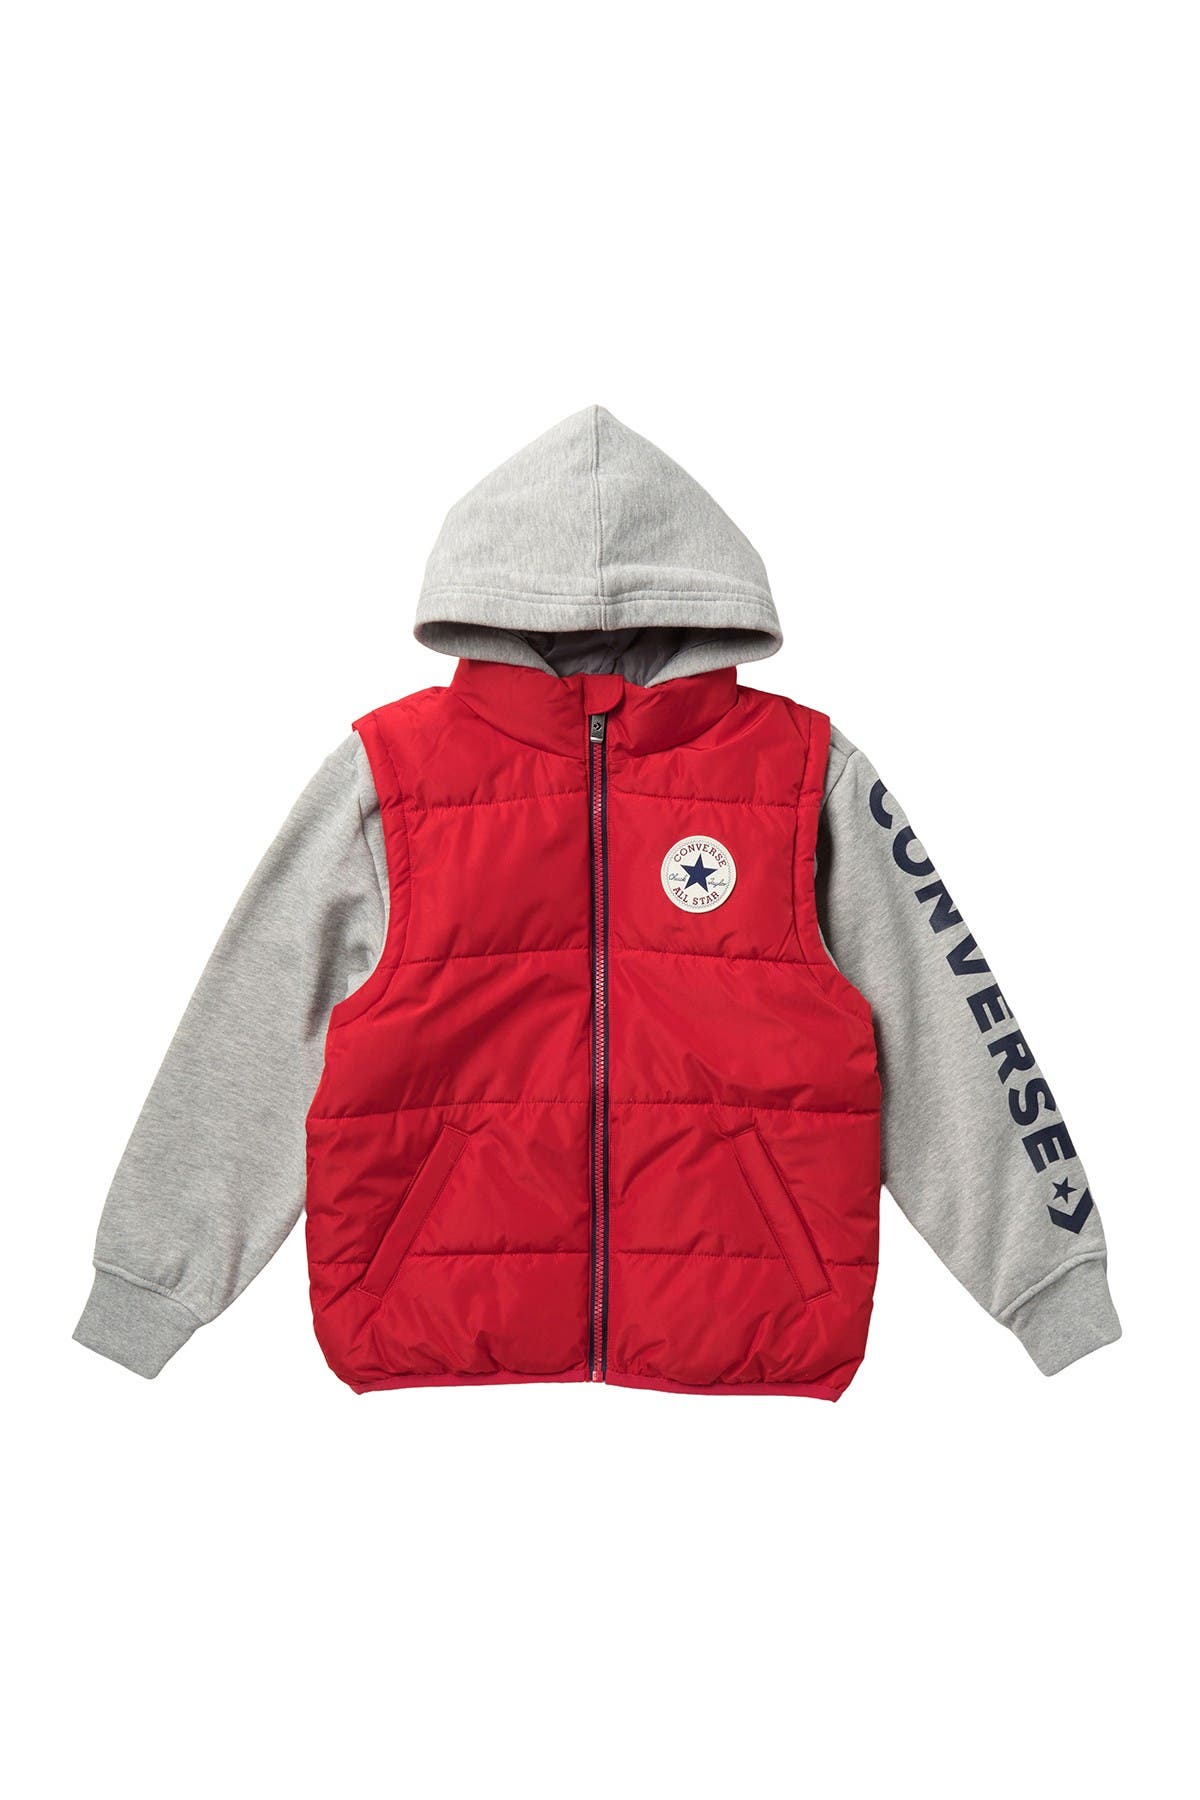 converse quilted coat